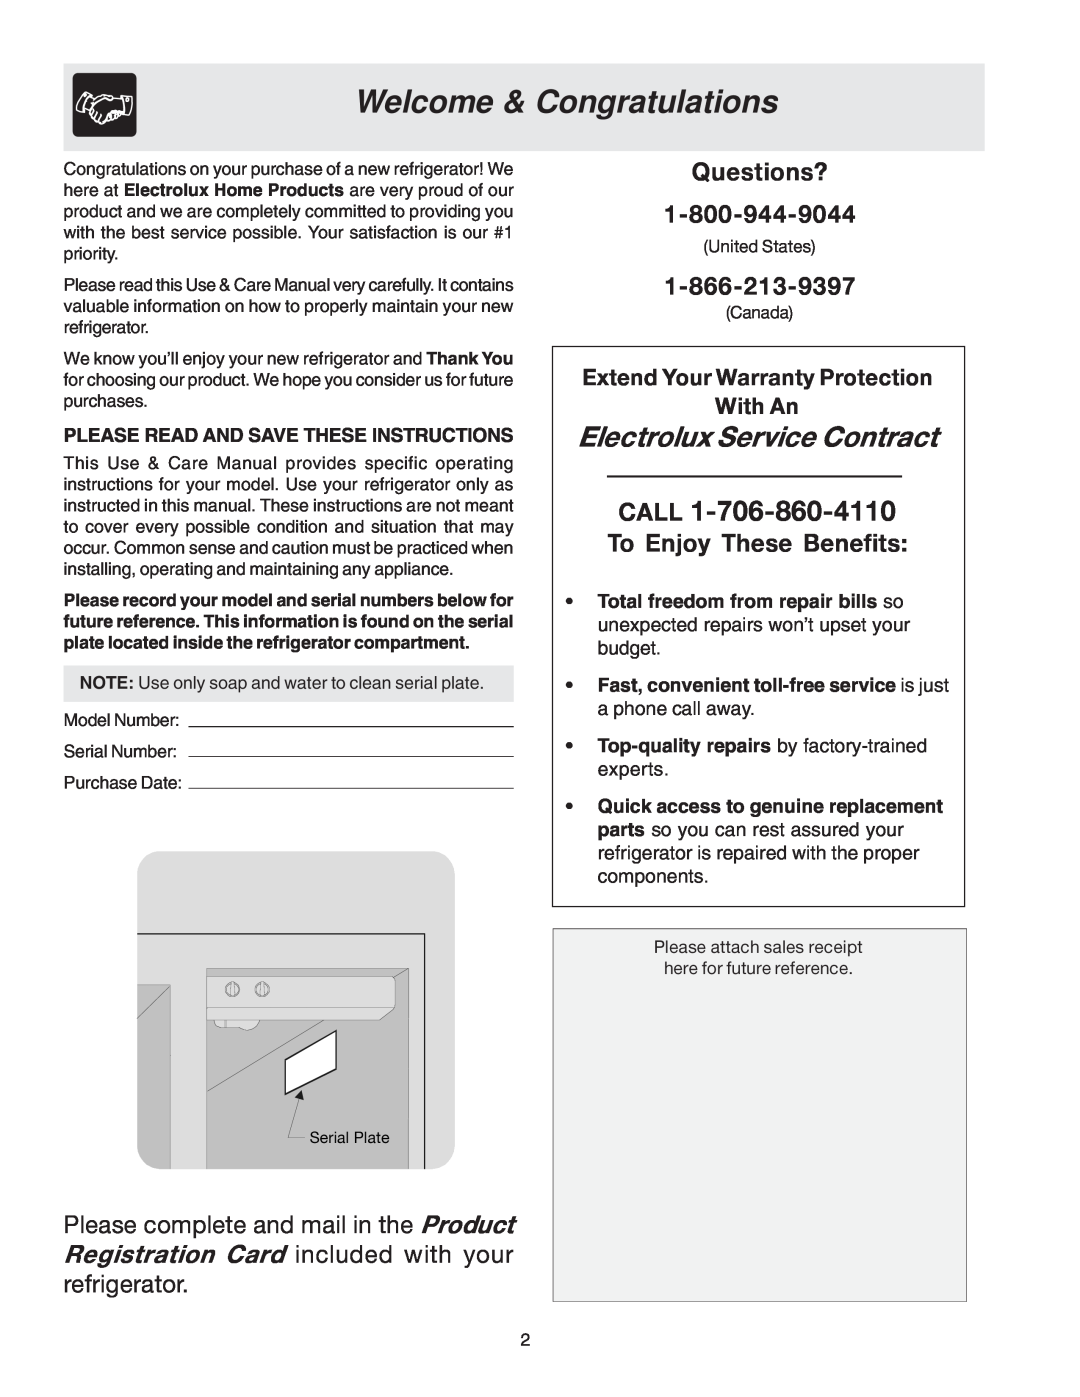 Frigidaire FRS26KF7AW1 manual Welcome & Congratulations, Please Read And Save These Instructions, Questions? 1-800-944-9044 